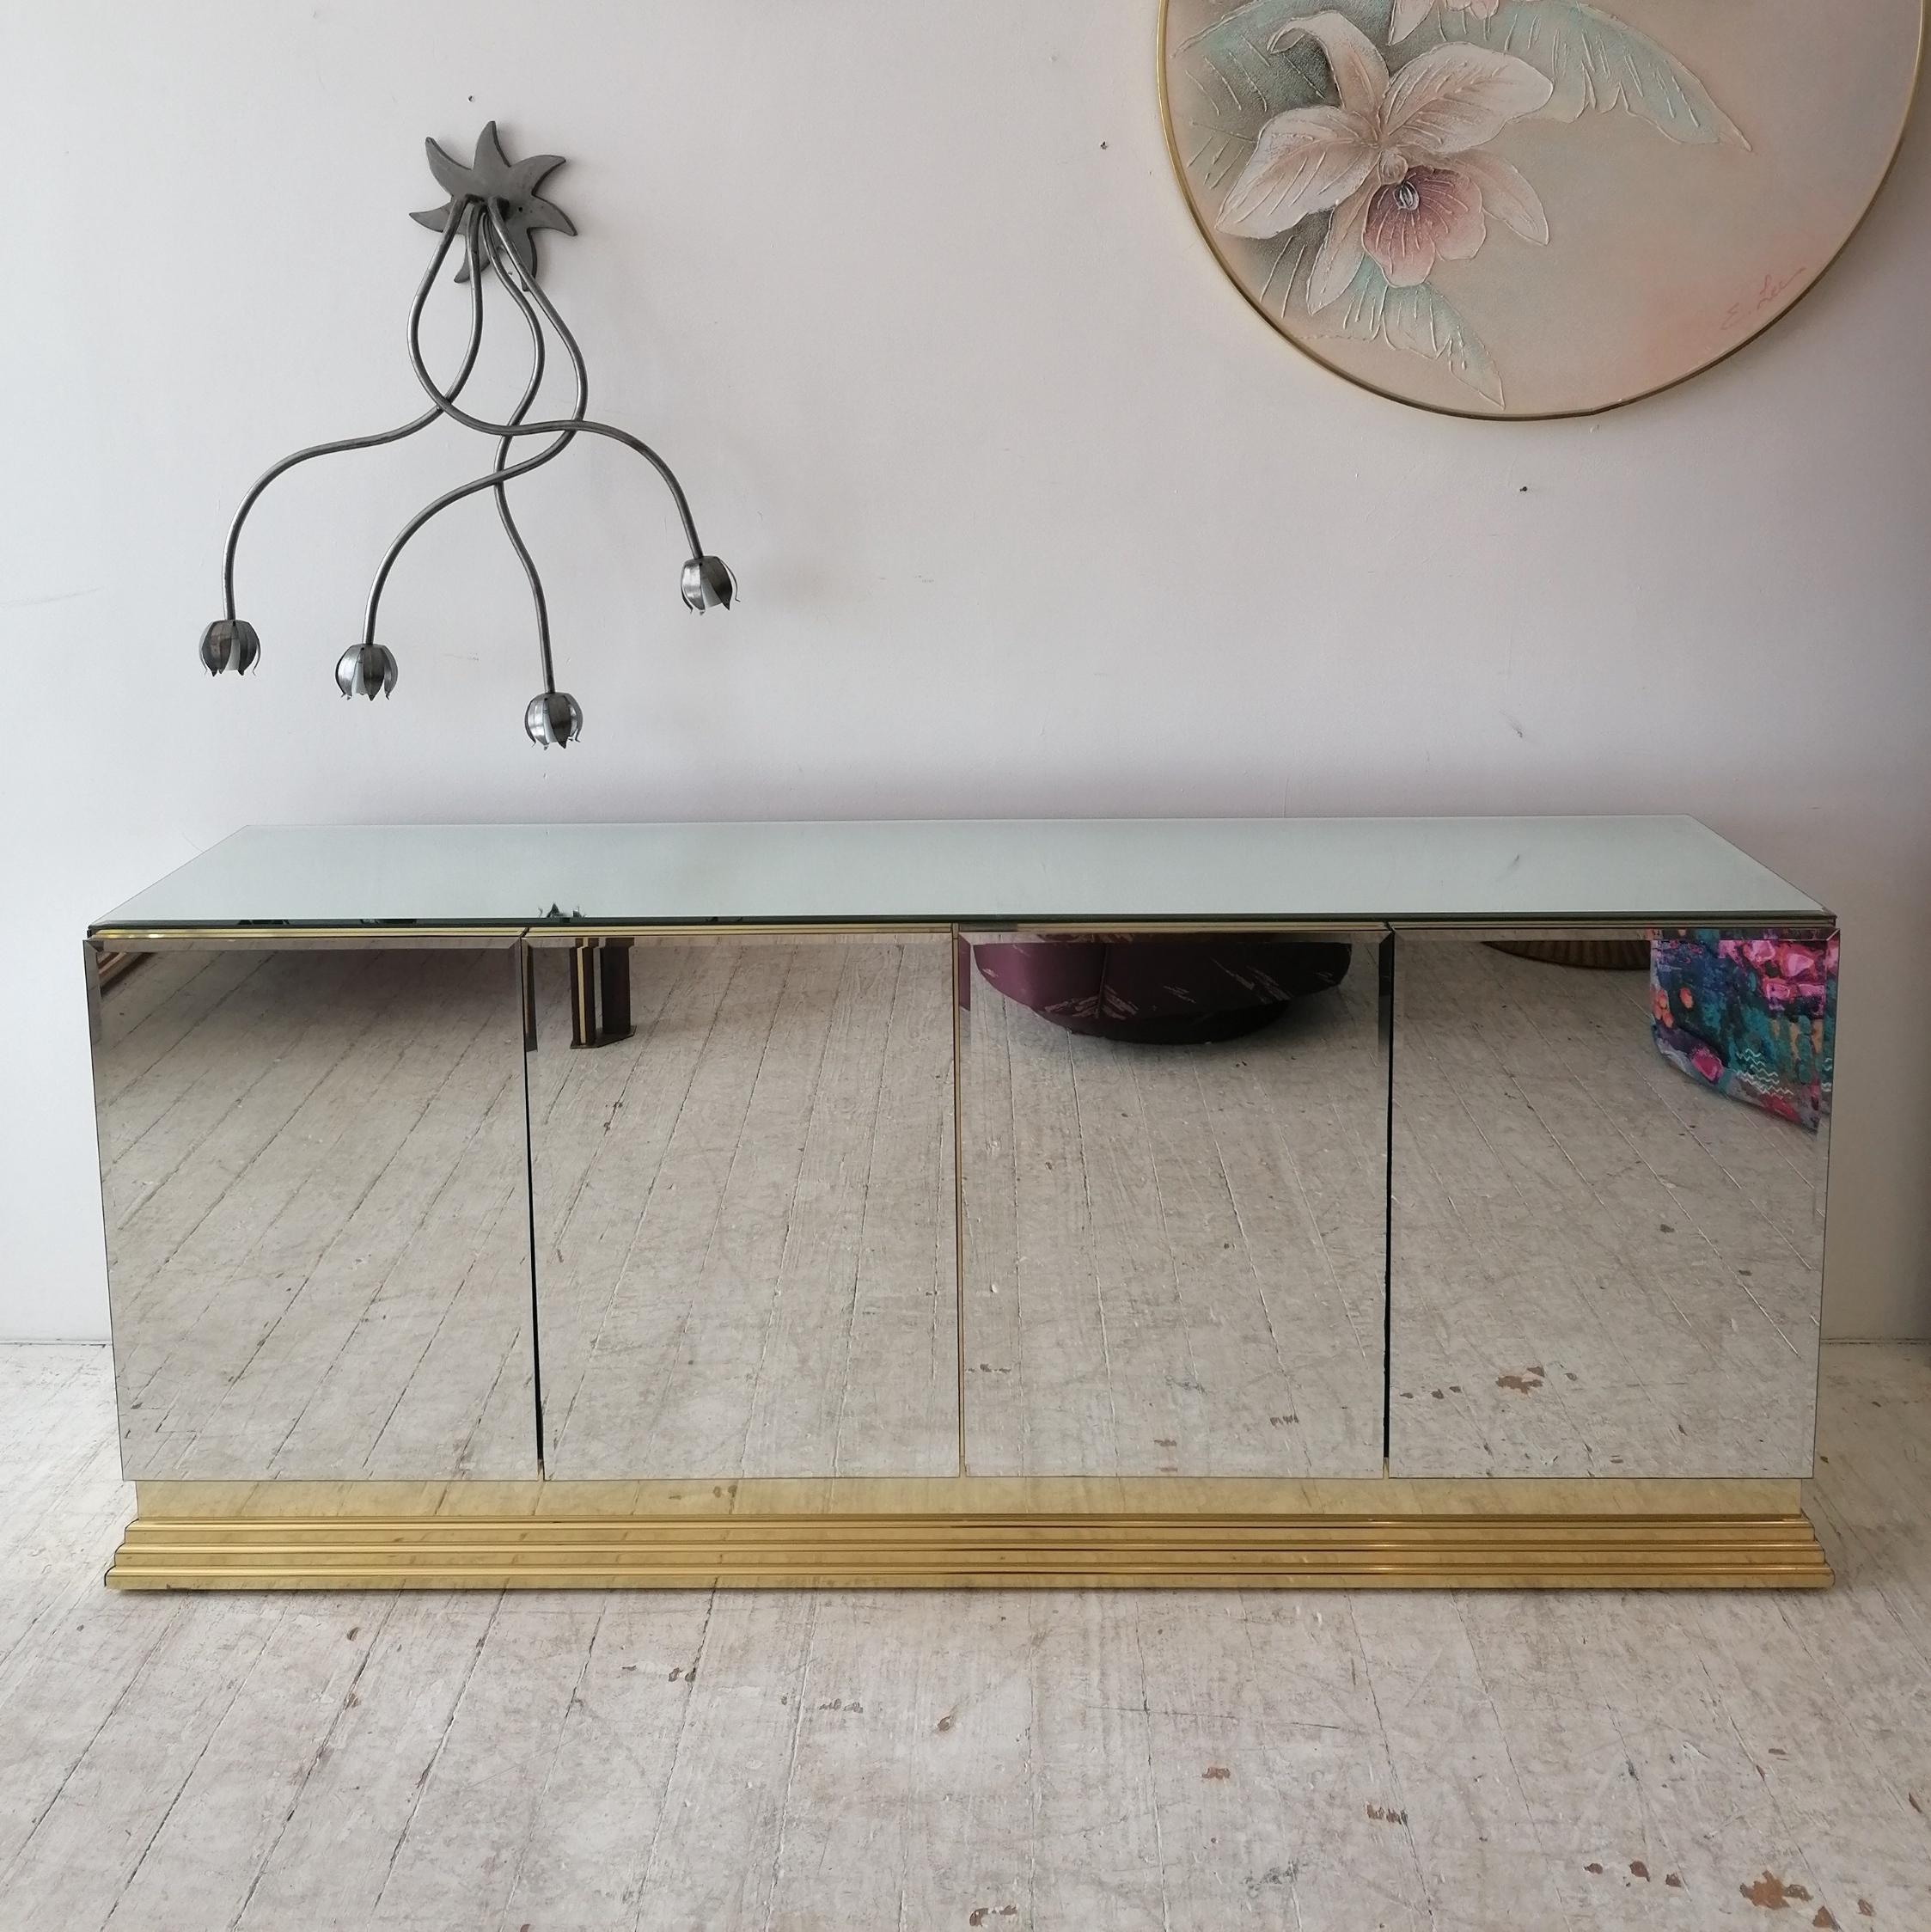 Mid-Century Modern Vintage American Mirrored Glass Sideboard By Ello Furniture, 1970s 1980s